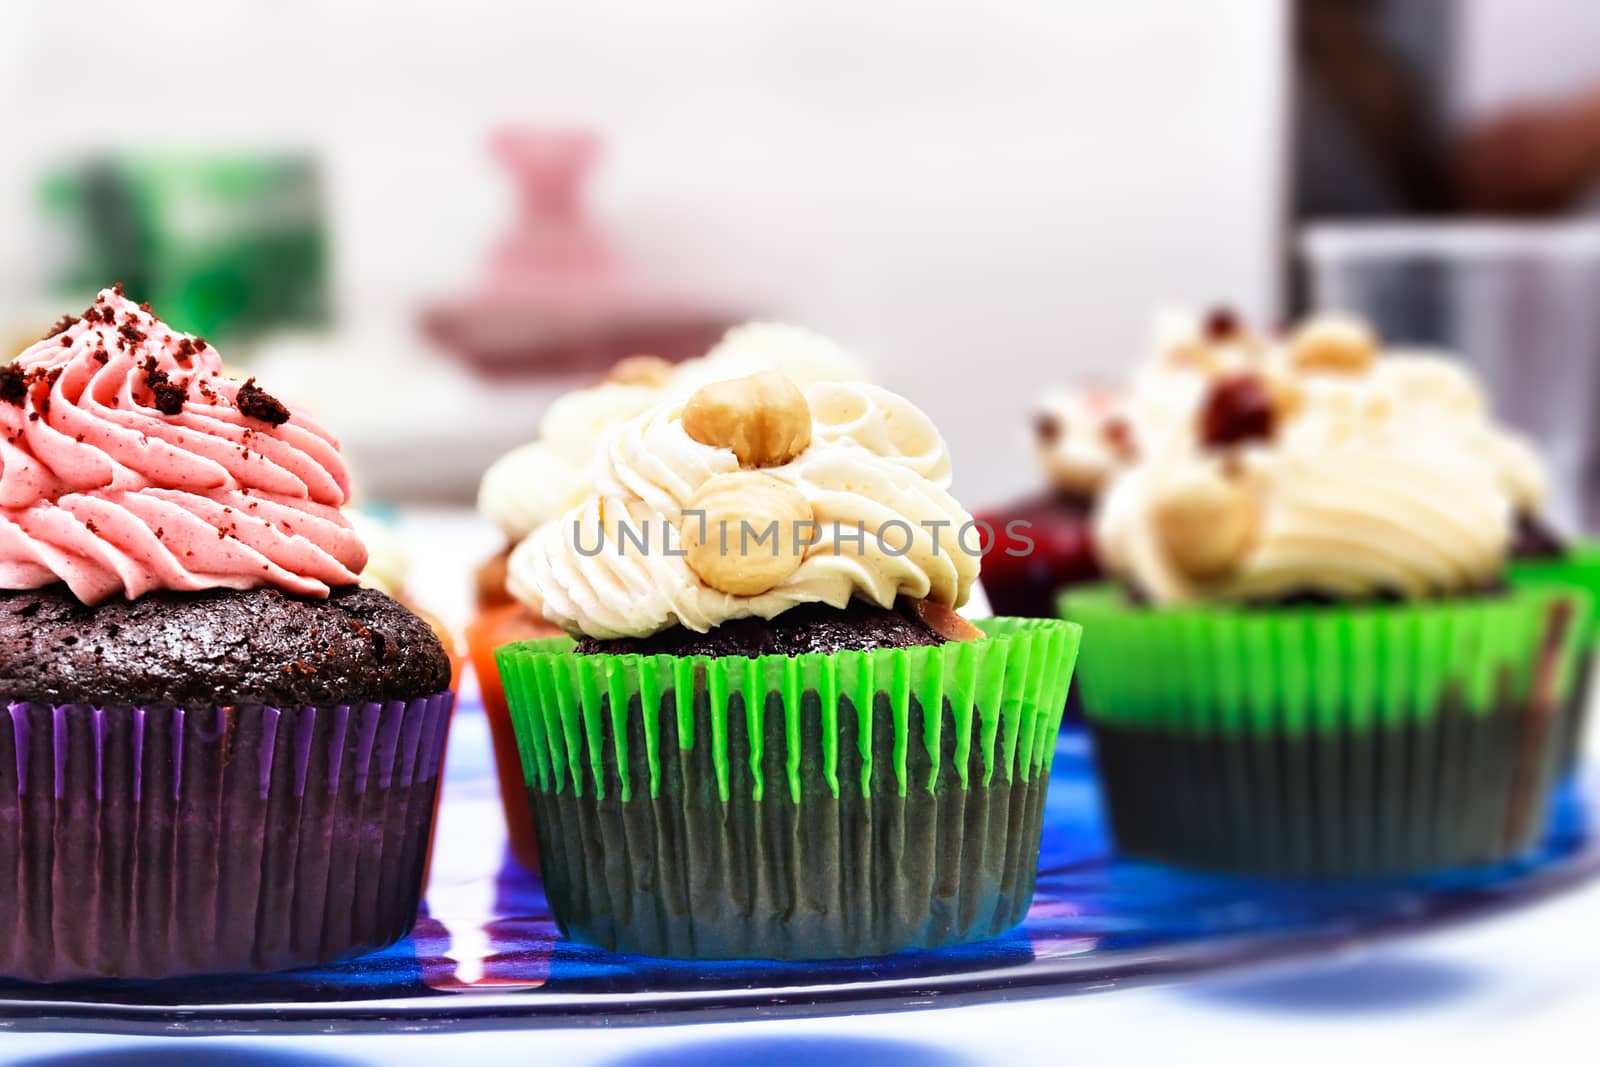 Cupcakes on a blue stand. Horizontal image.